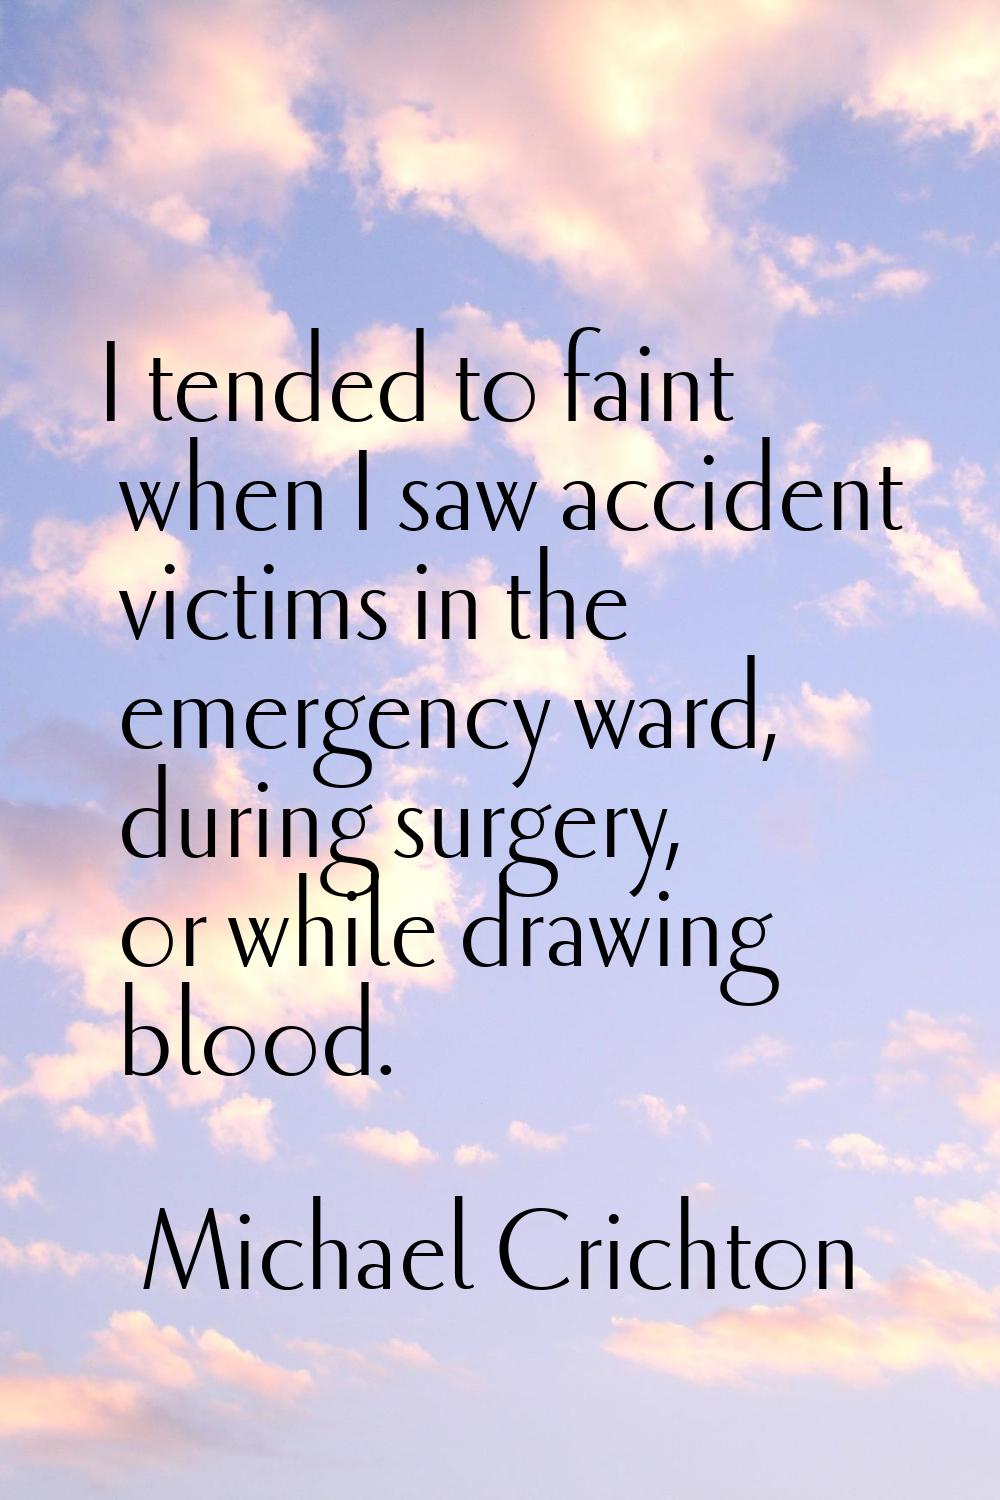 I tended to faint when I saw accident victims in the emergency ward, during surgery, or while drawi